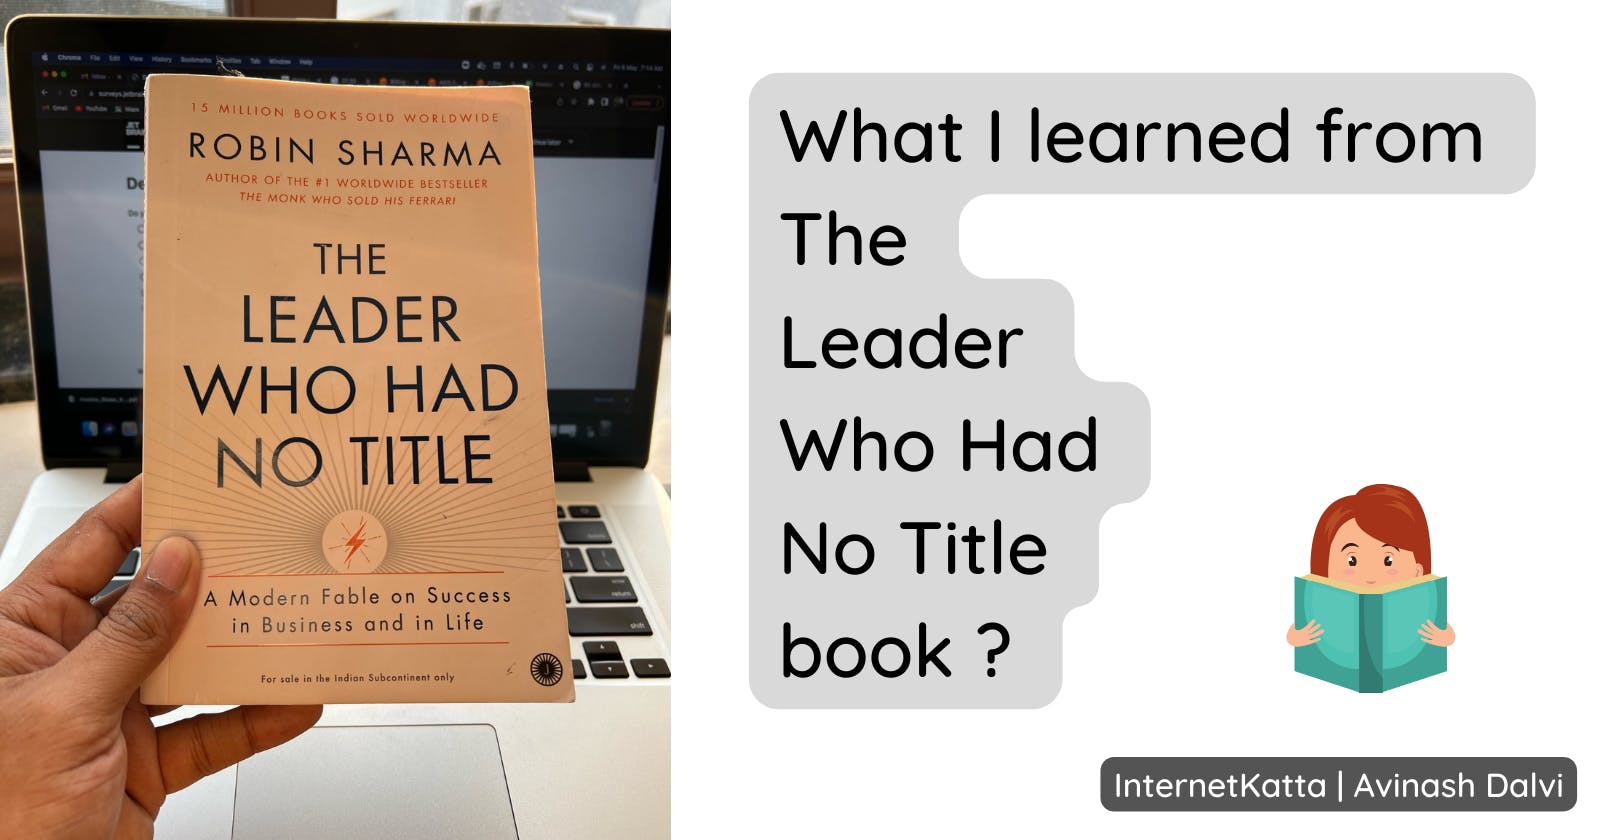 What I learned from The Leader who had no title book ?